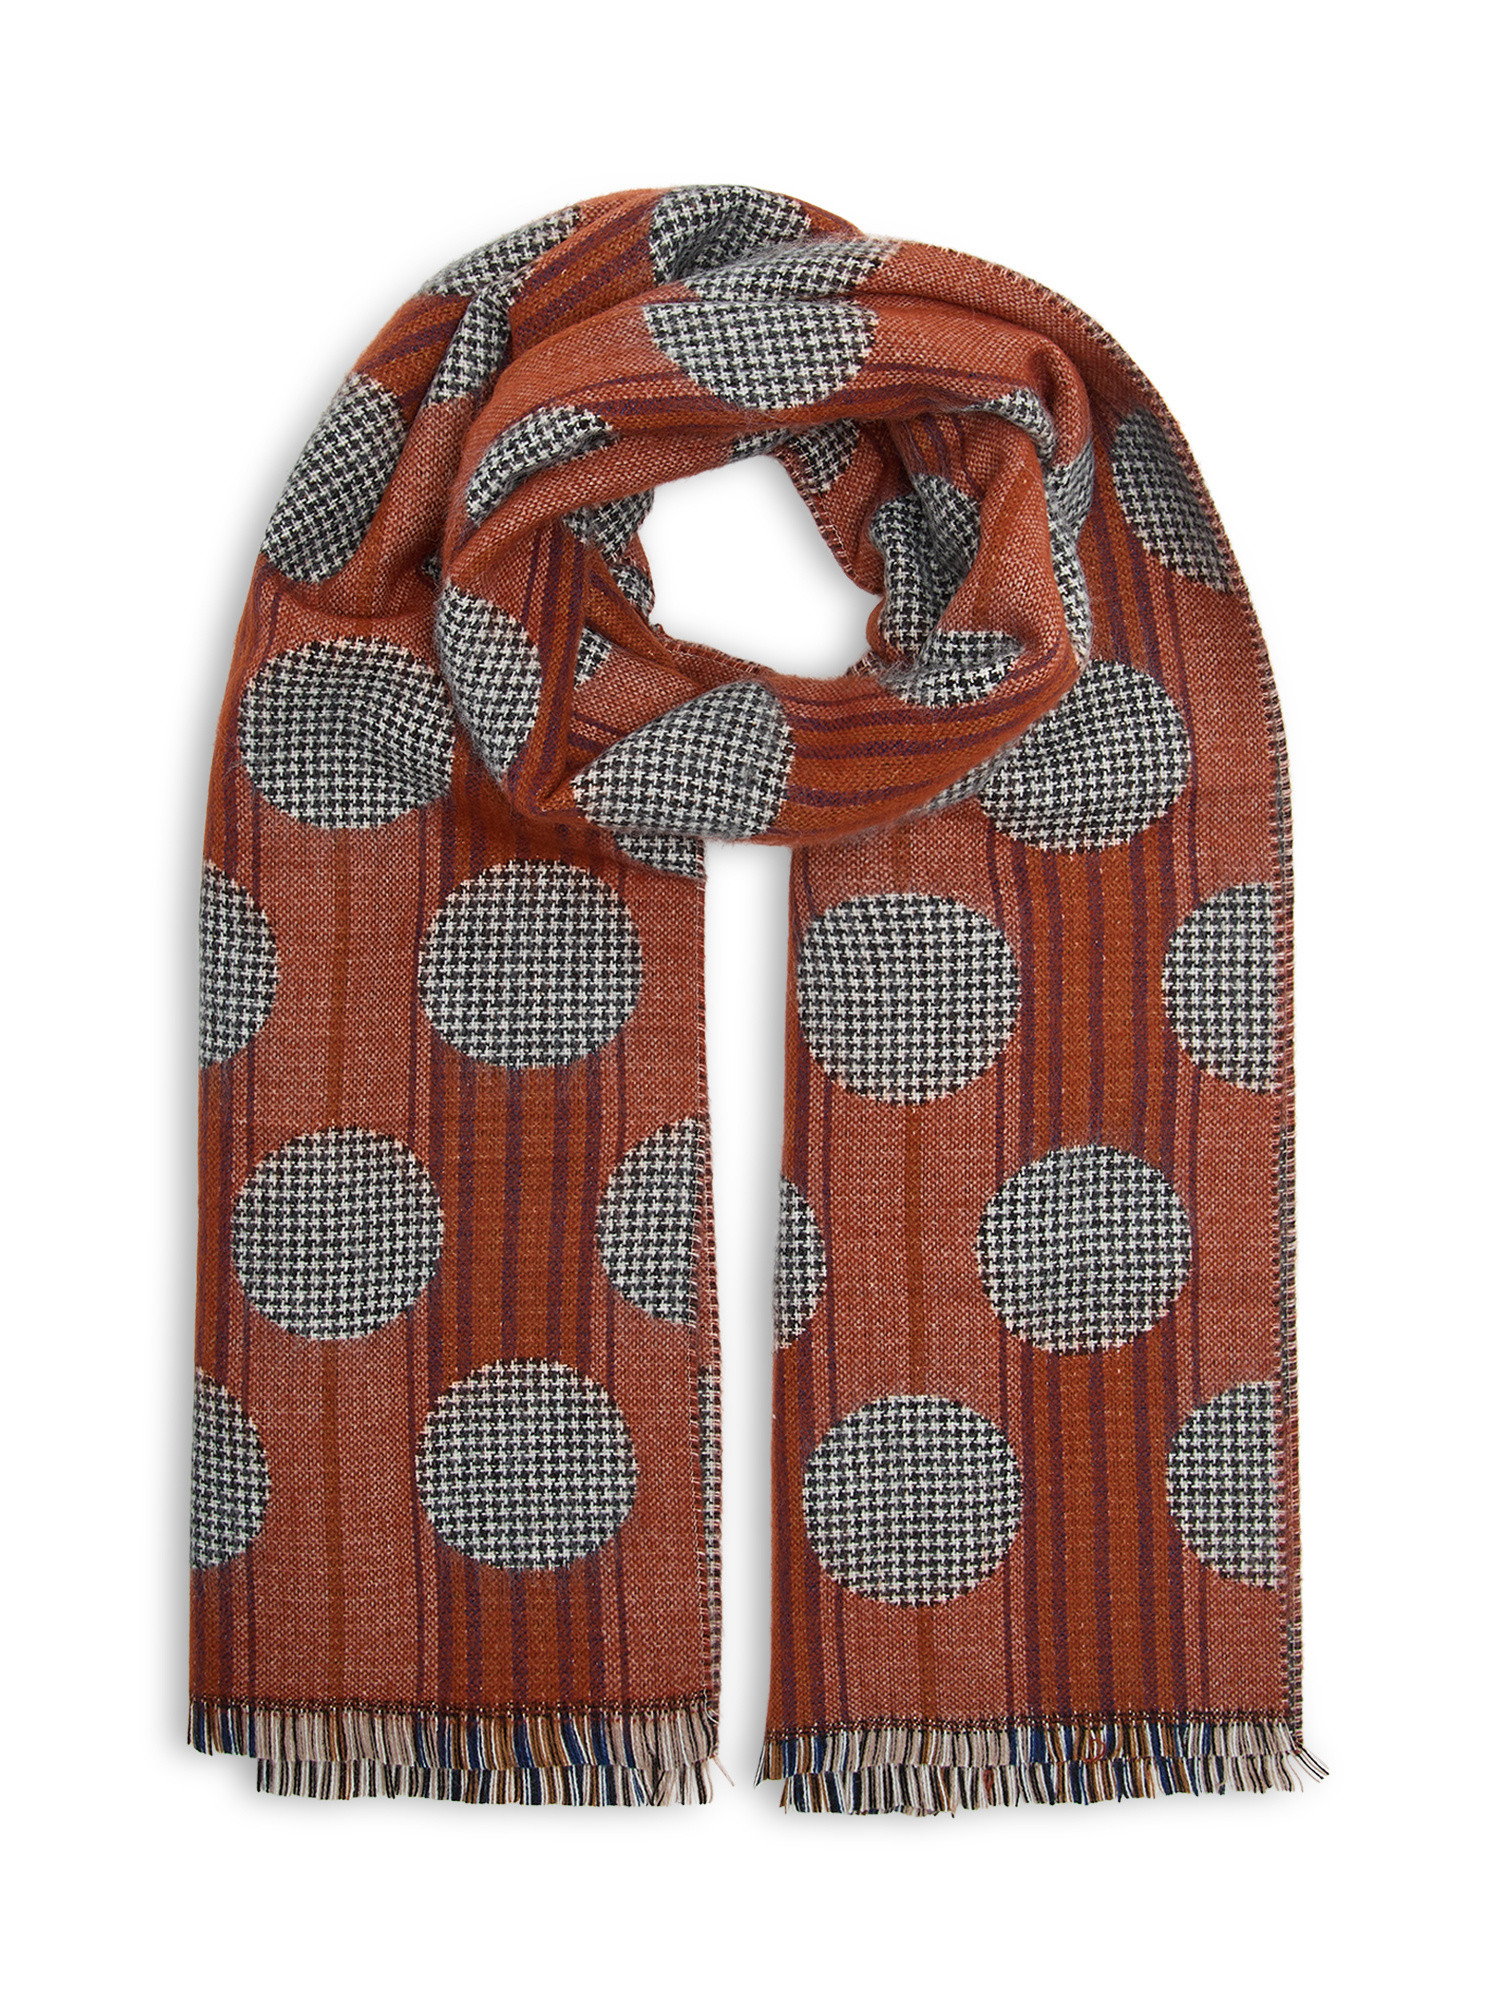 Koan - Polka dot and pied de poule patterned stole, Brown, large image number 0